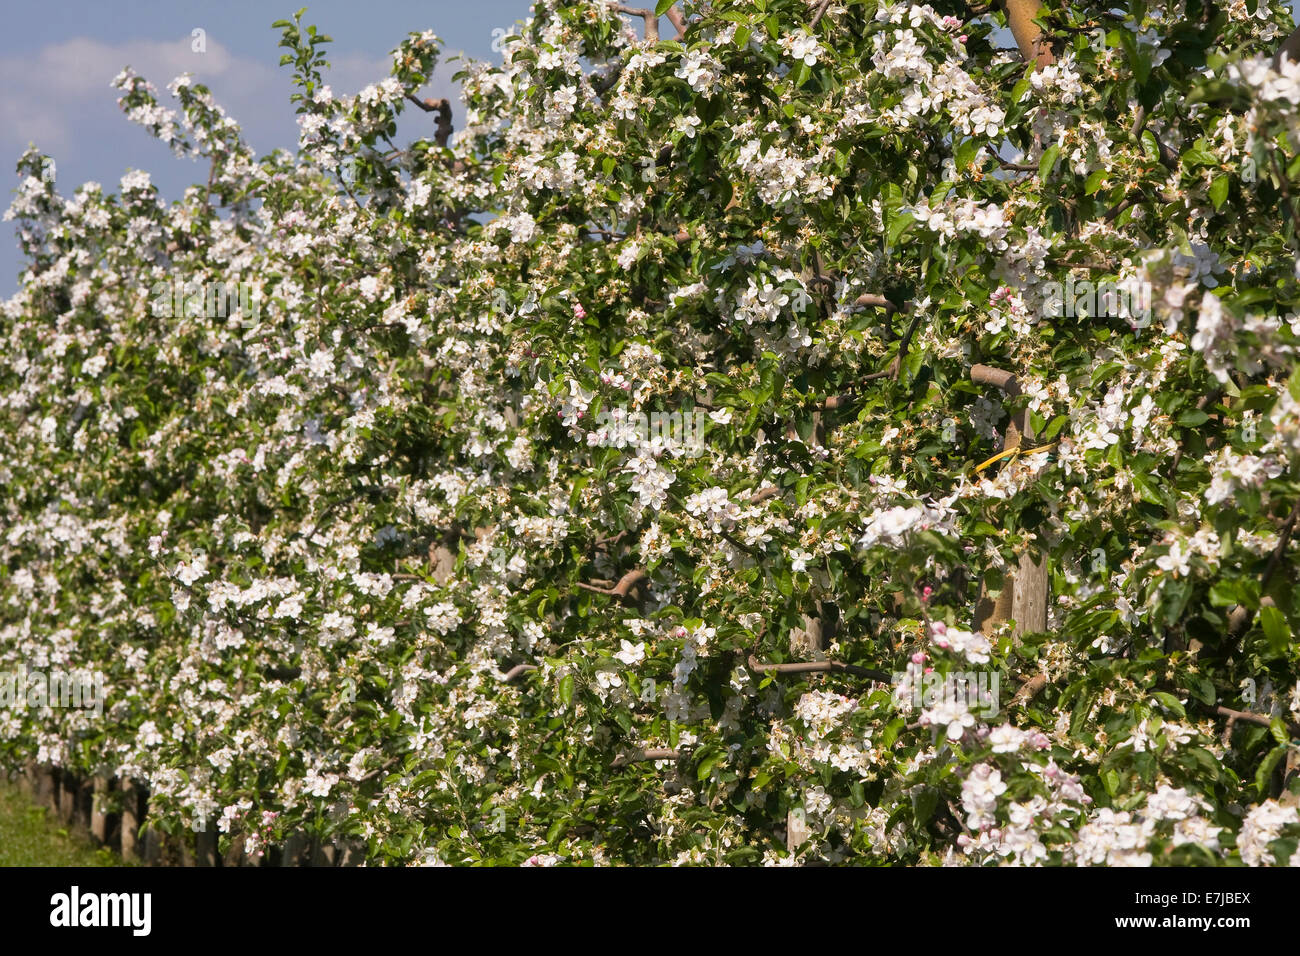 Old land, country, cultivation, apple blossoms, apple trees, tree blossom, blossom, blossoms, flourish, FRG, federal republic, G Stock Photo